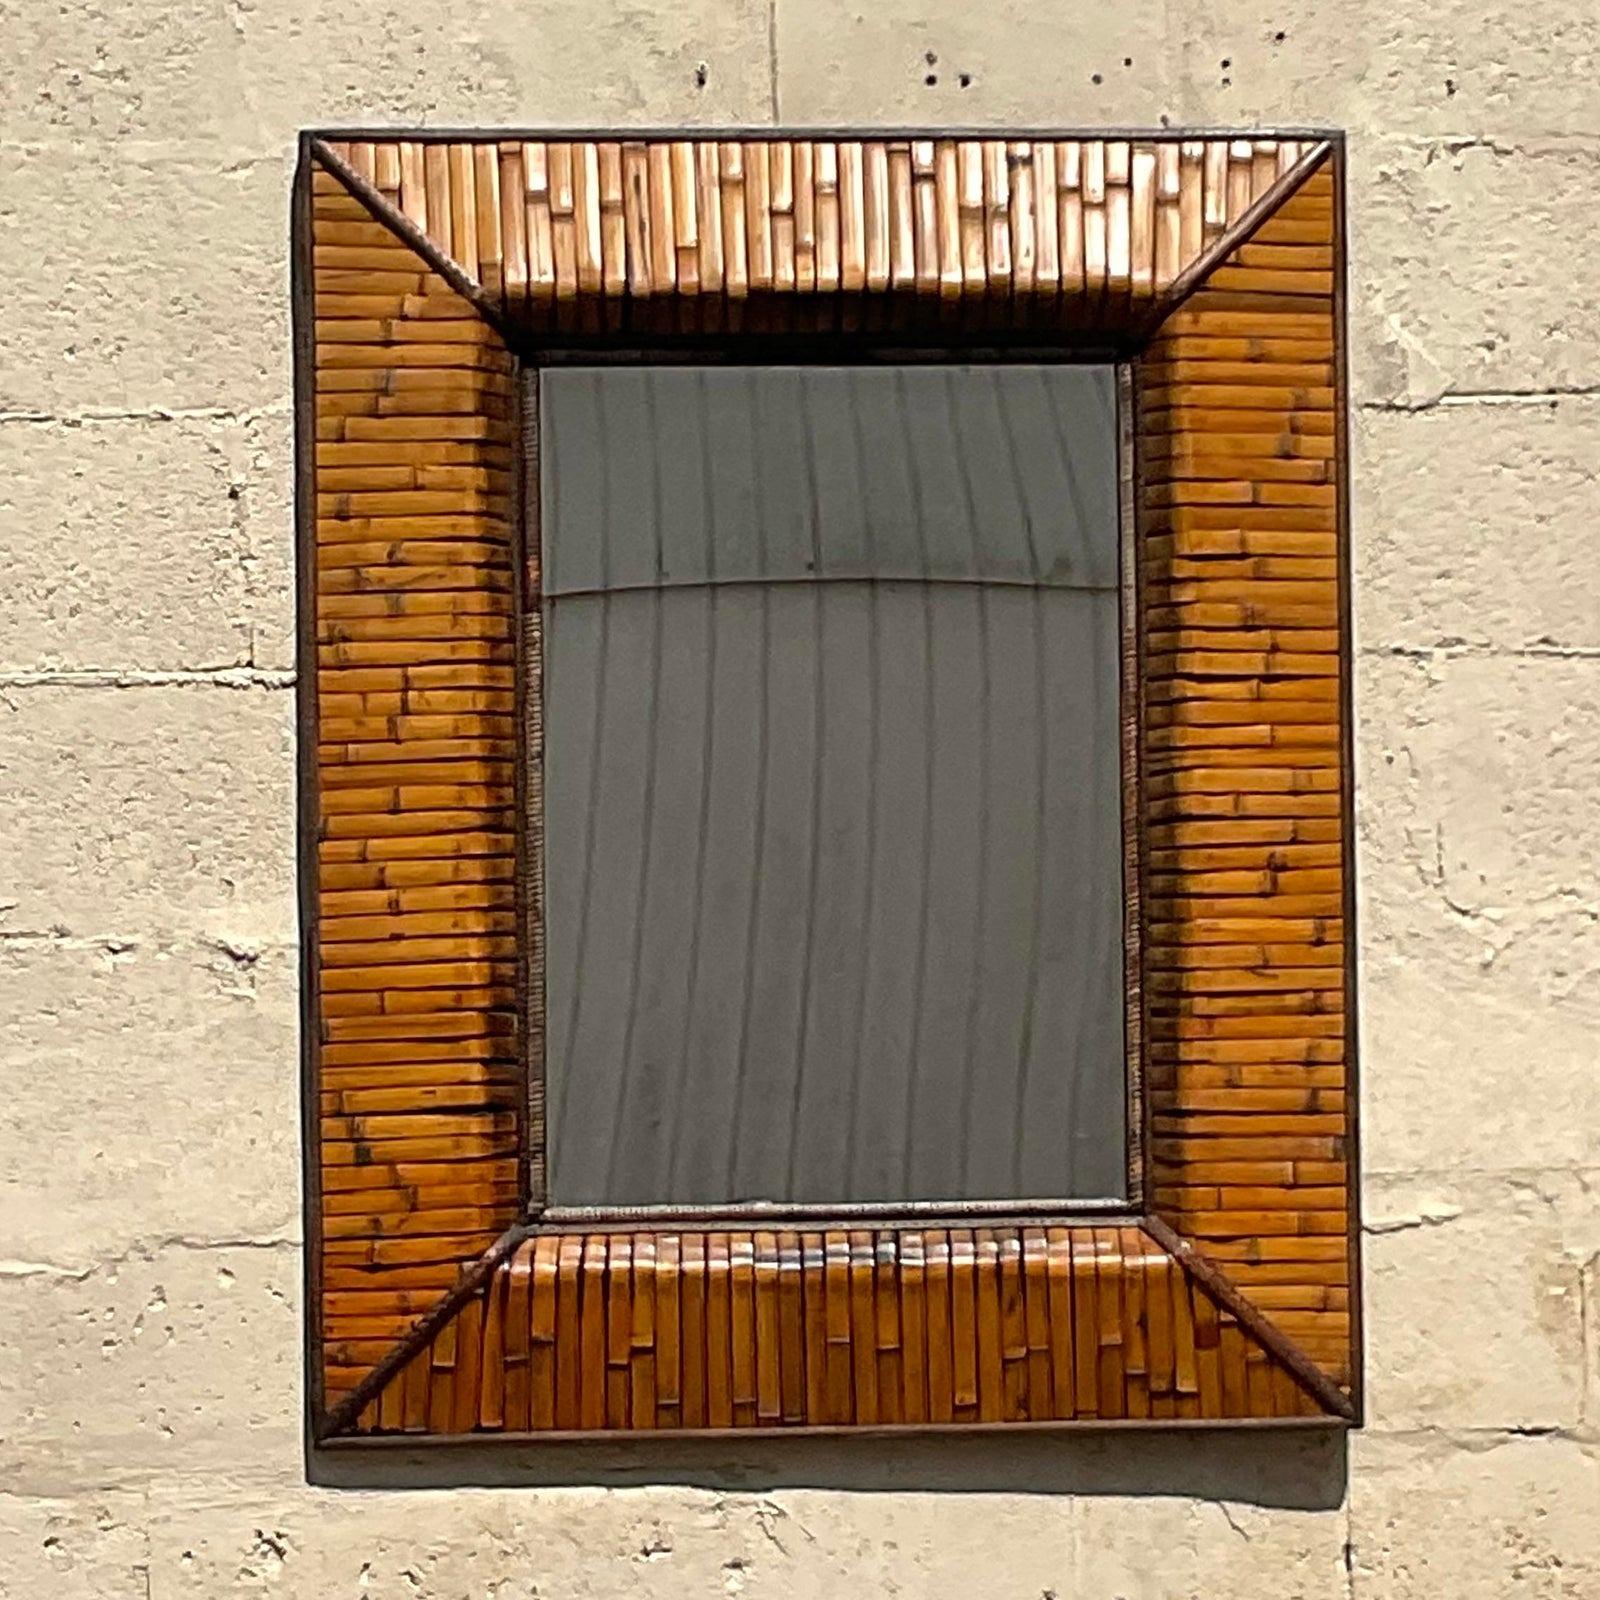 A fabulous vintage Coastal wall mirror. A chic wrapped rattan in a rich warm color. Acquired from a Palm Beach estate.